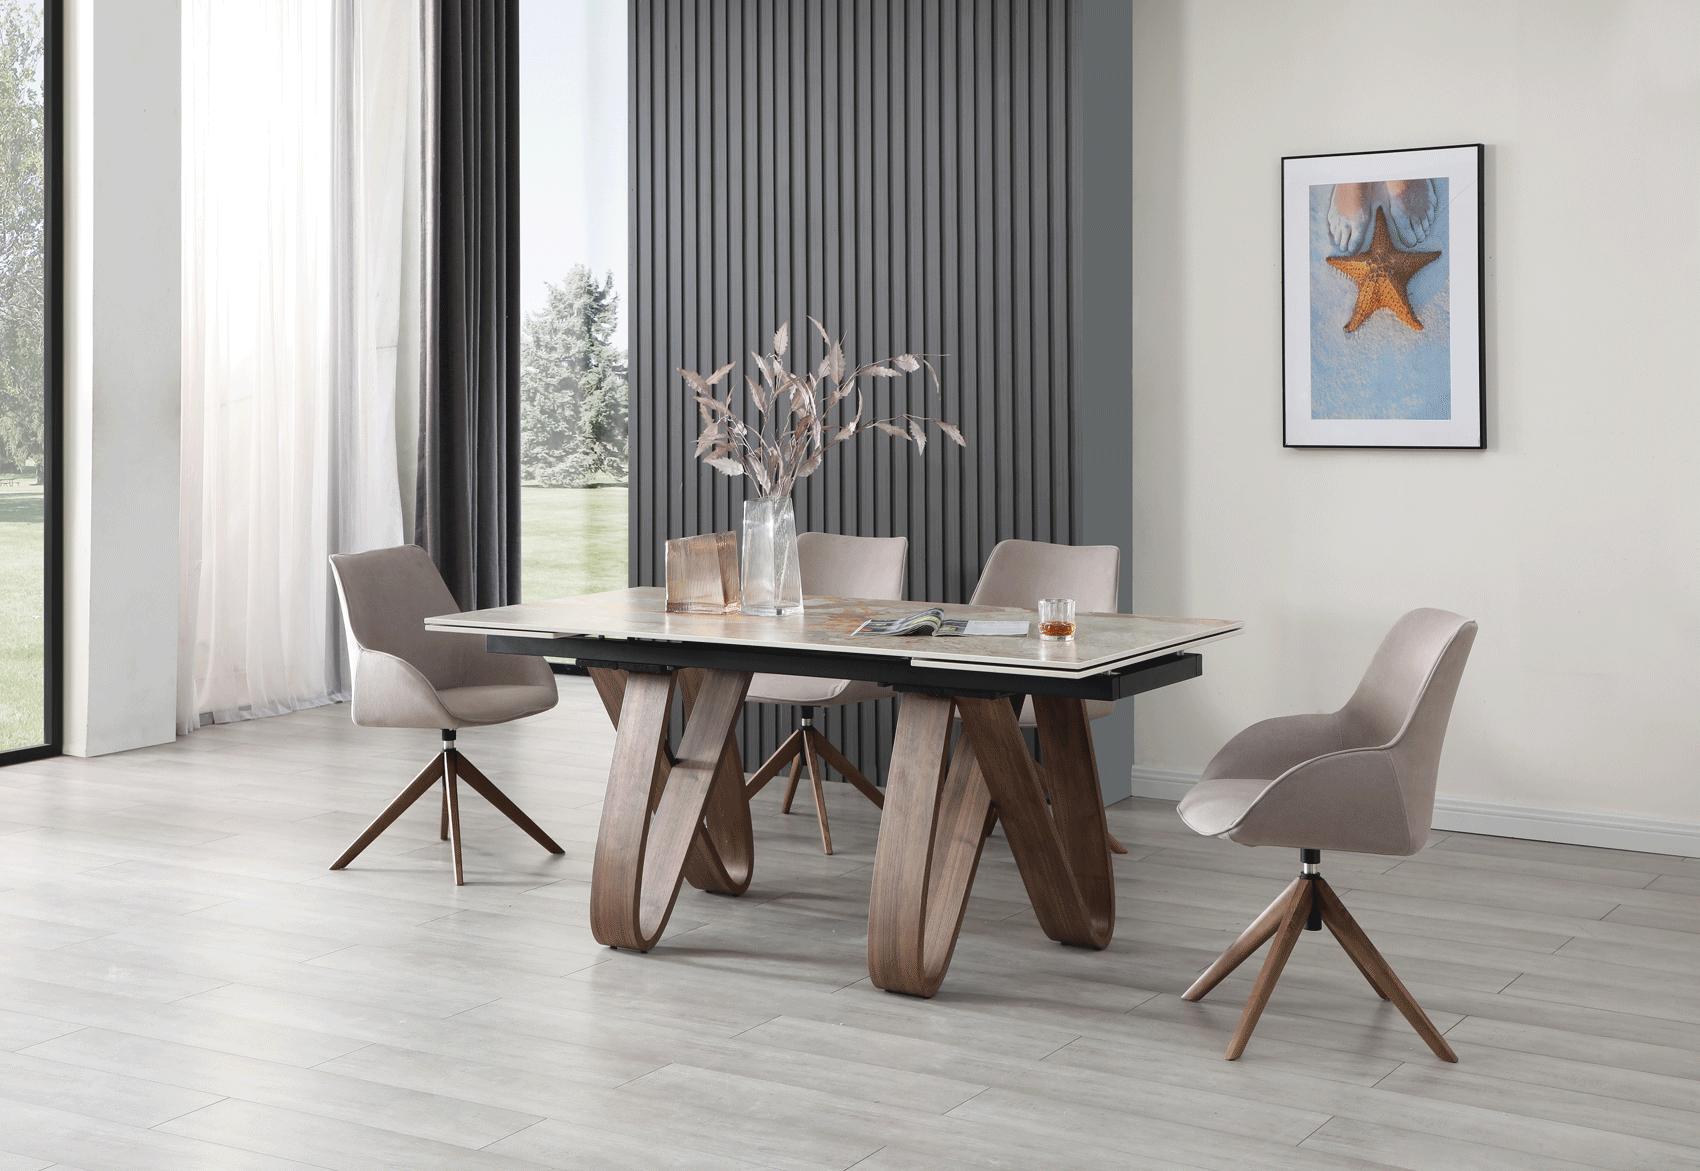 Contemporary Dining Table Set 9086TABLE 9086TABLE-5PC in Walnut, Beige Eco Leather